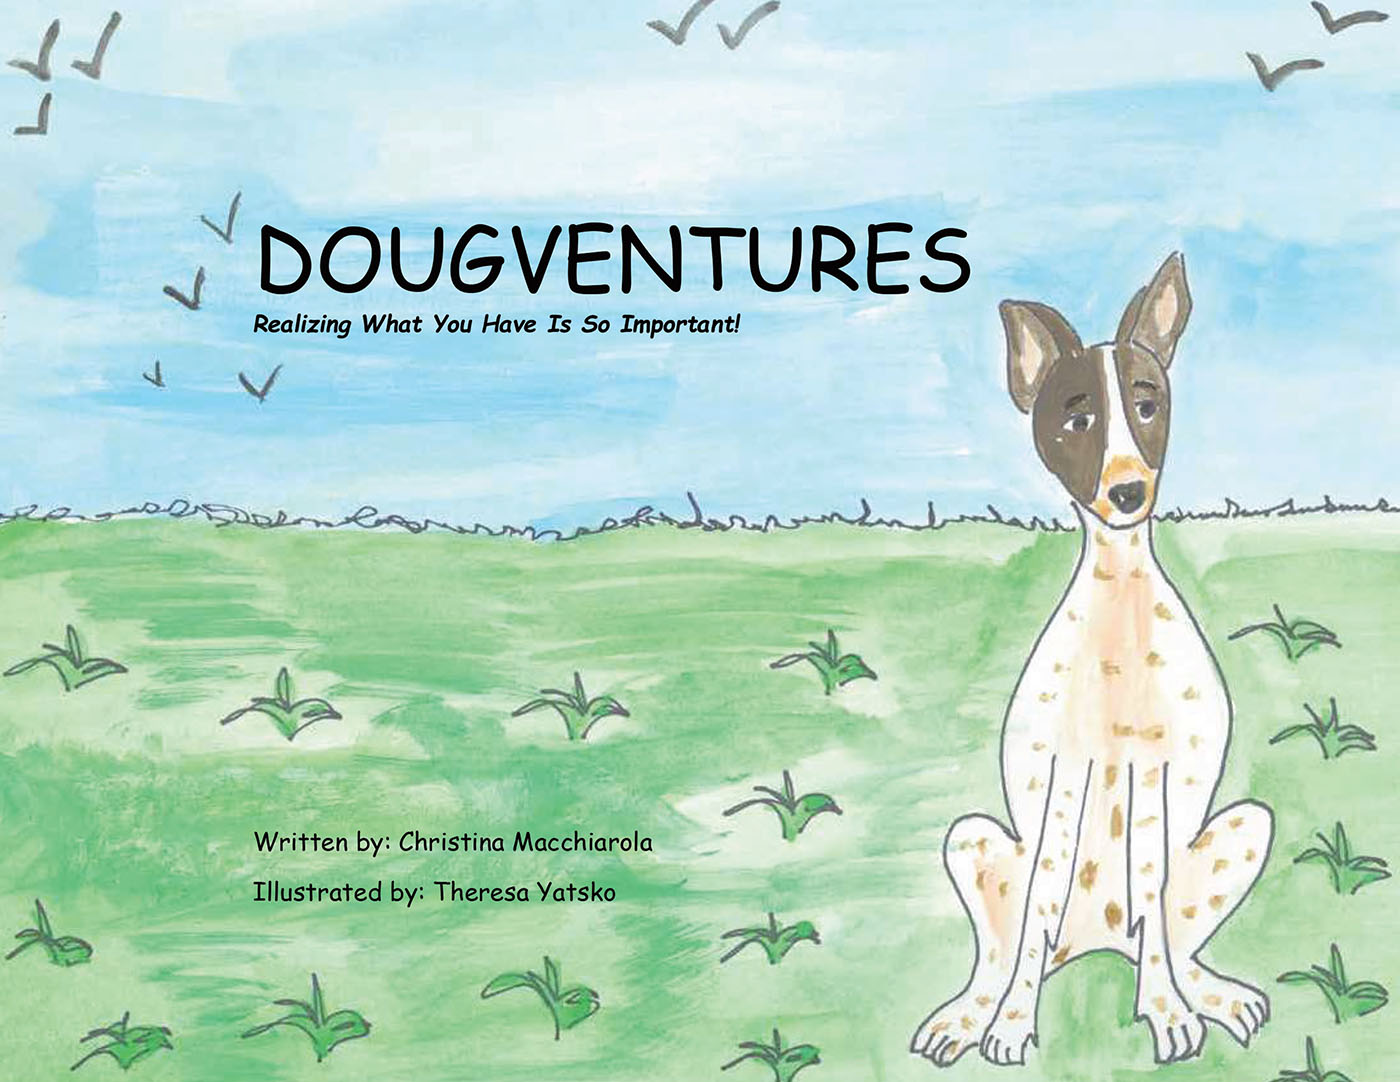 Author Christina Macchiarola’s New Book, "Dougventures: Realizing what you have is so important!" Follows a Dog Who Leaves His Home and Learns Something Important